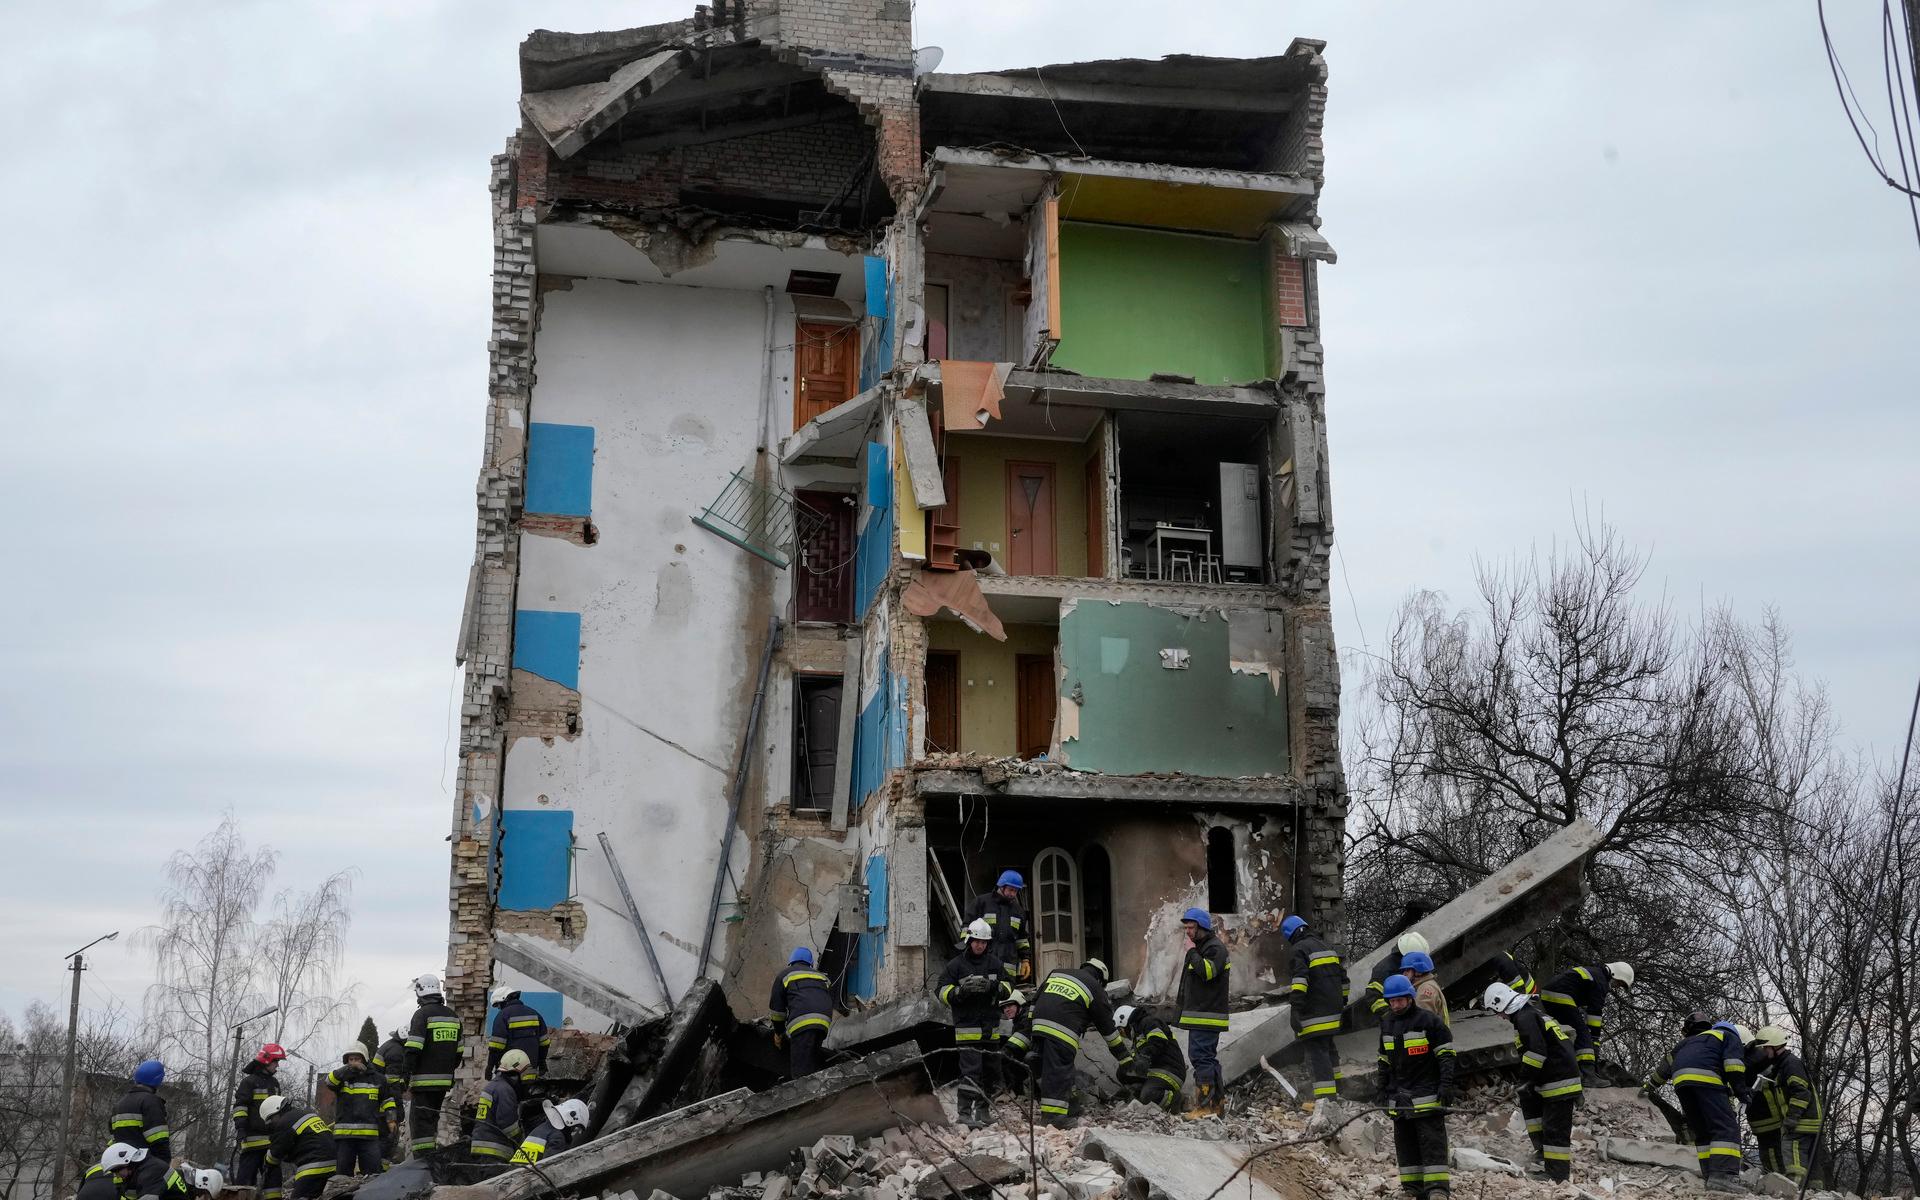 Emergency workers search through the rubble of an apartment building ruined in the Russian shelling in Borodyanka, Ukraine, Wednesday, April 6, 2022. (AP Photo/Efrem Lukatsky)  XEL103